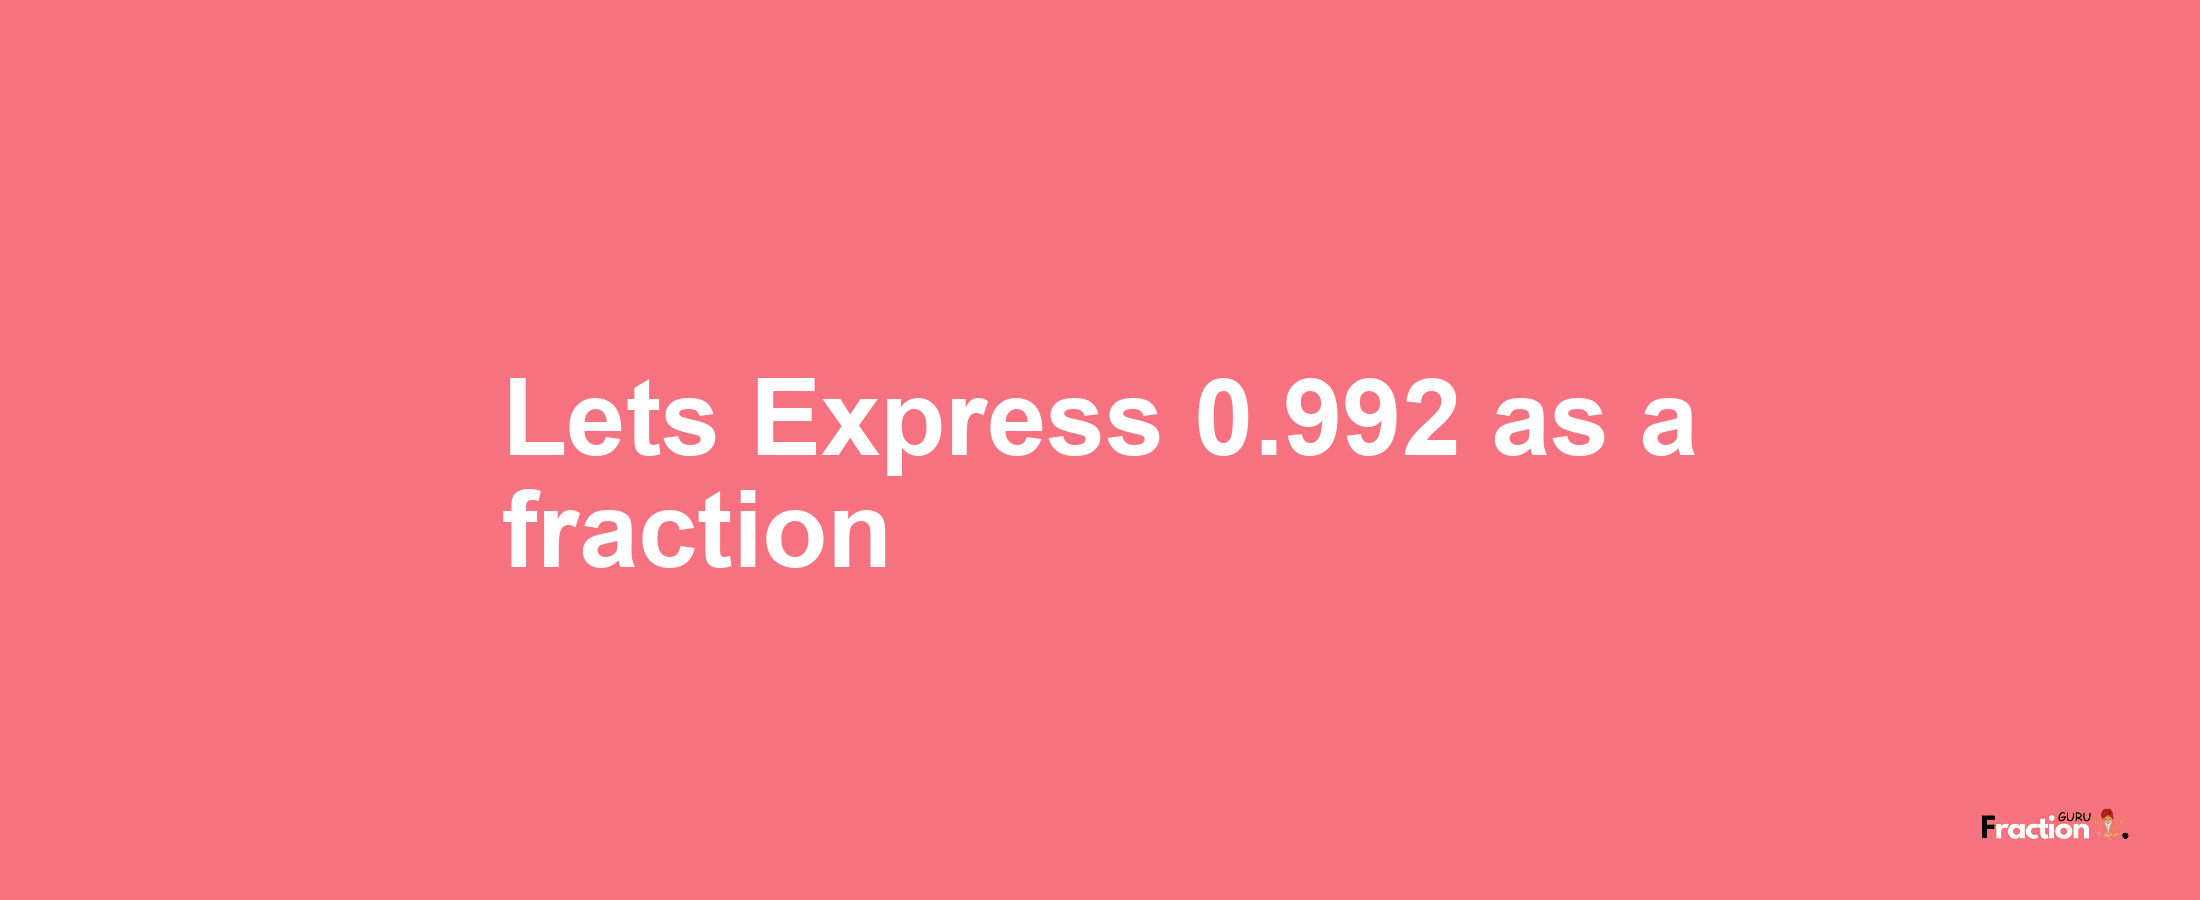 Lets Express 0.992 as afraction